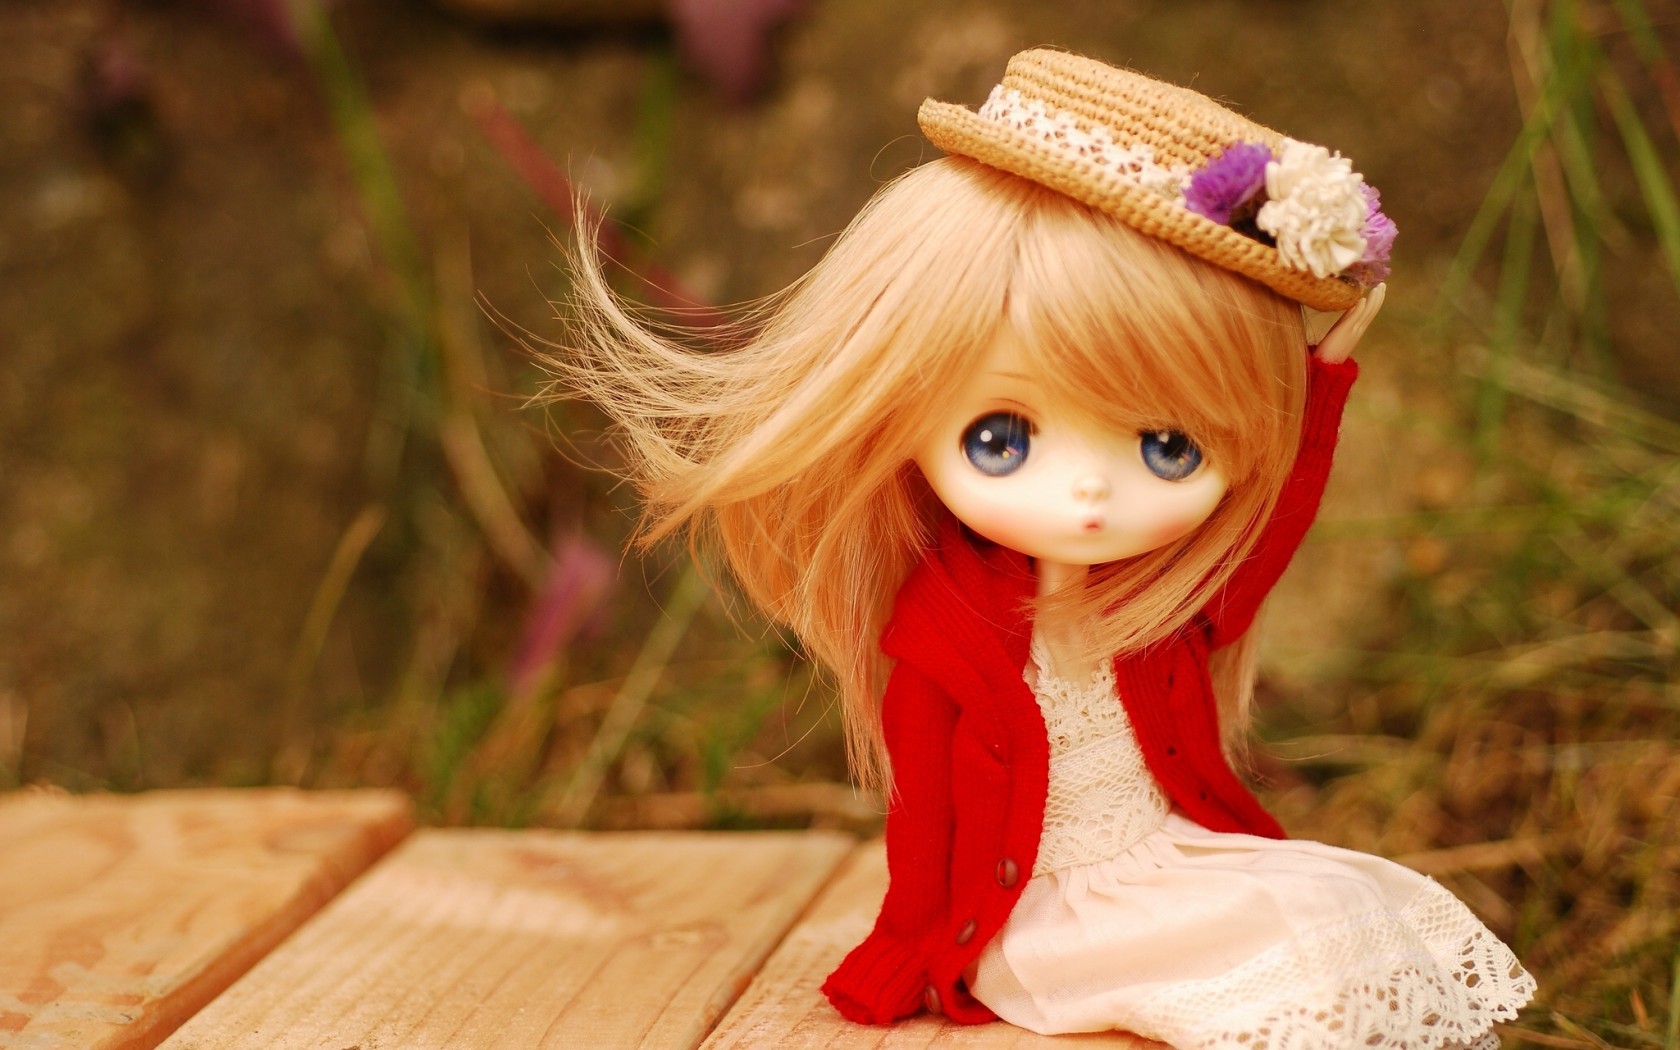 Beautiful Stylish Doll Hq Wallpaper - Cute Barbie Doll Wallpapers For  Mobile - 1680x1050 Wallpaper 